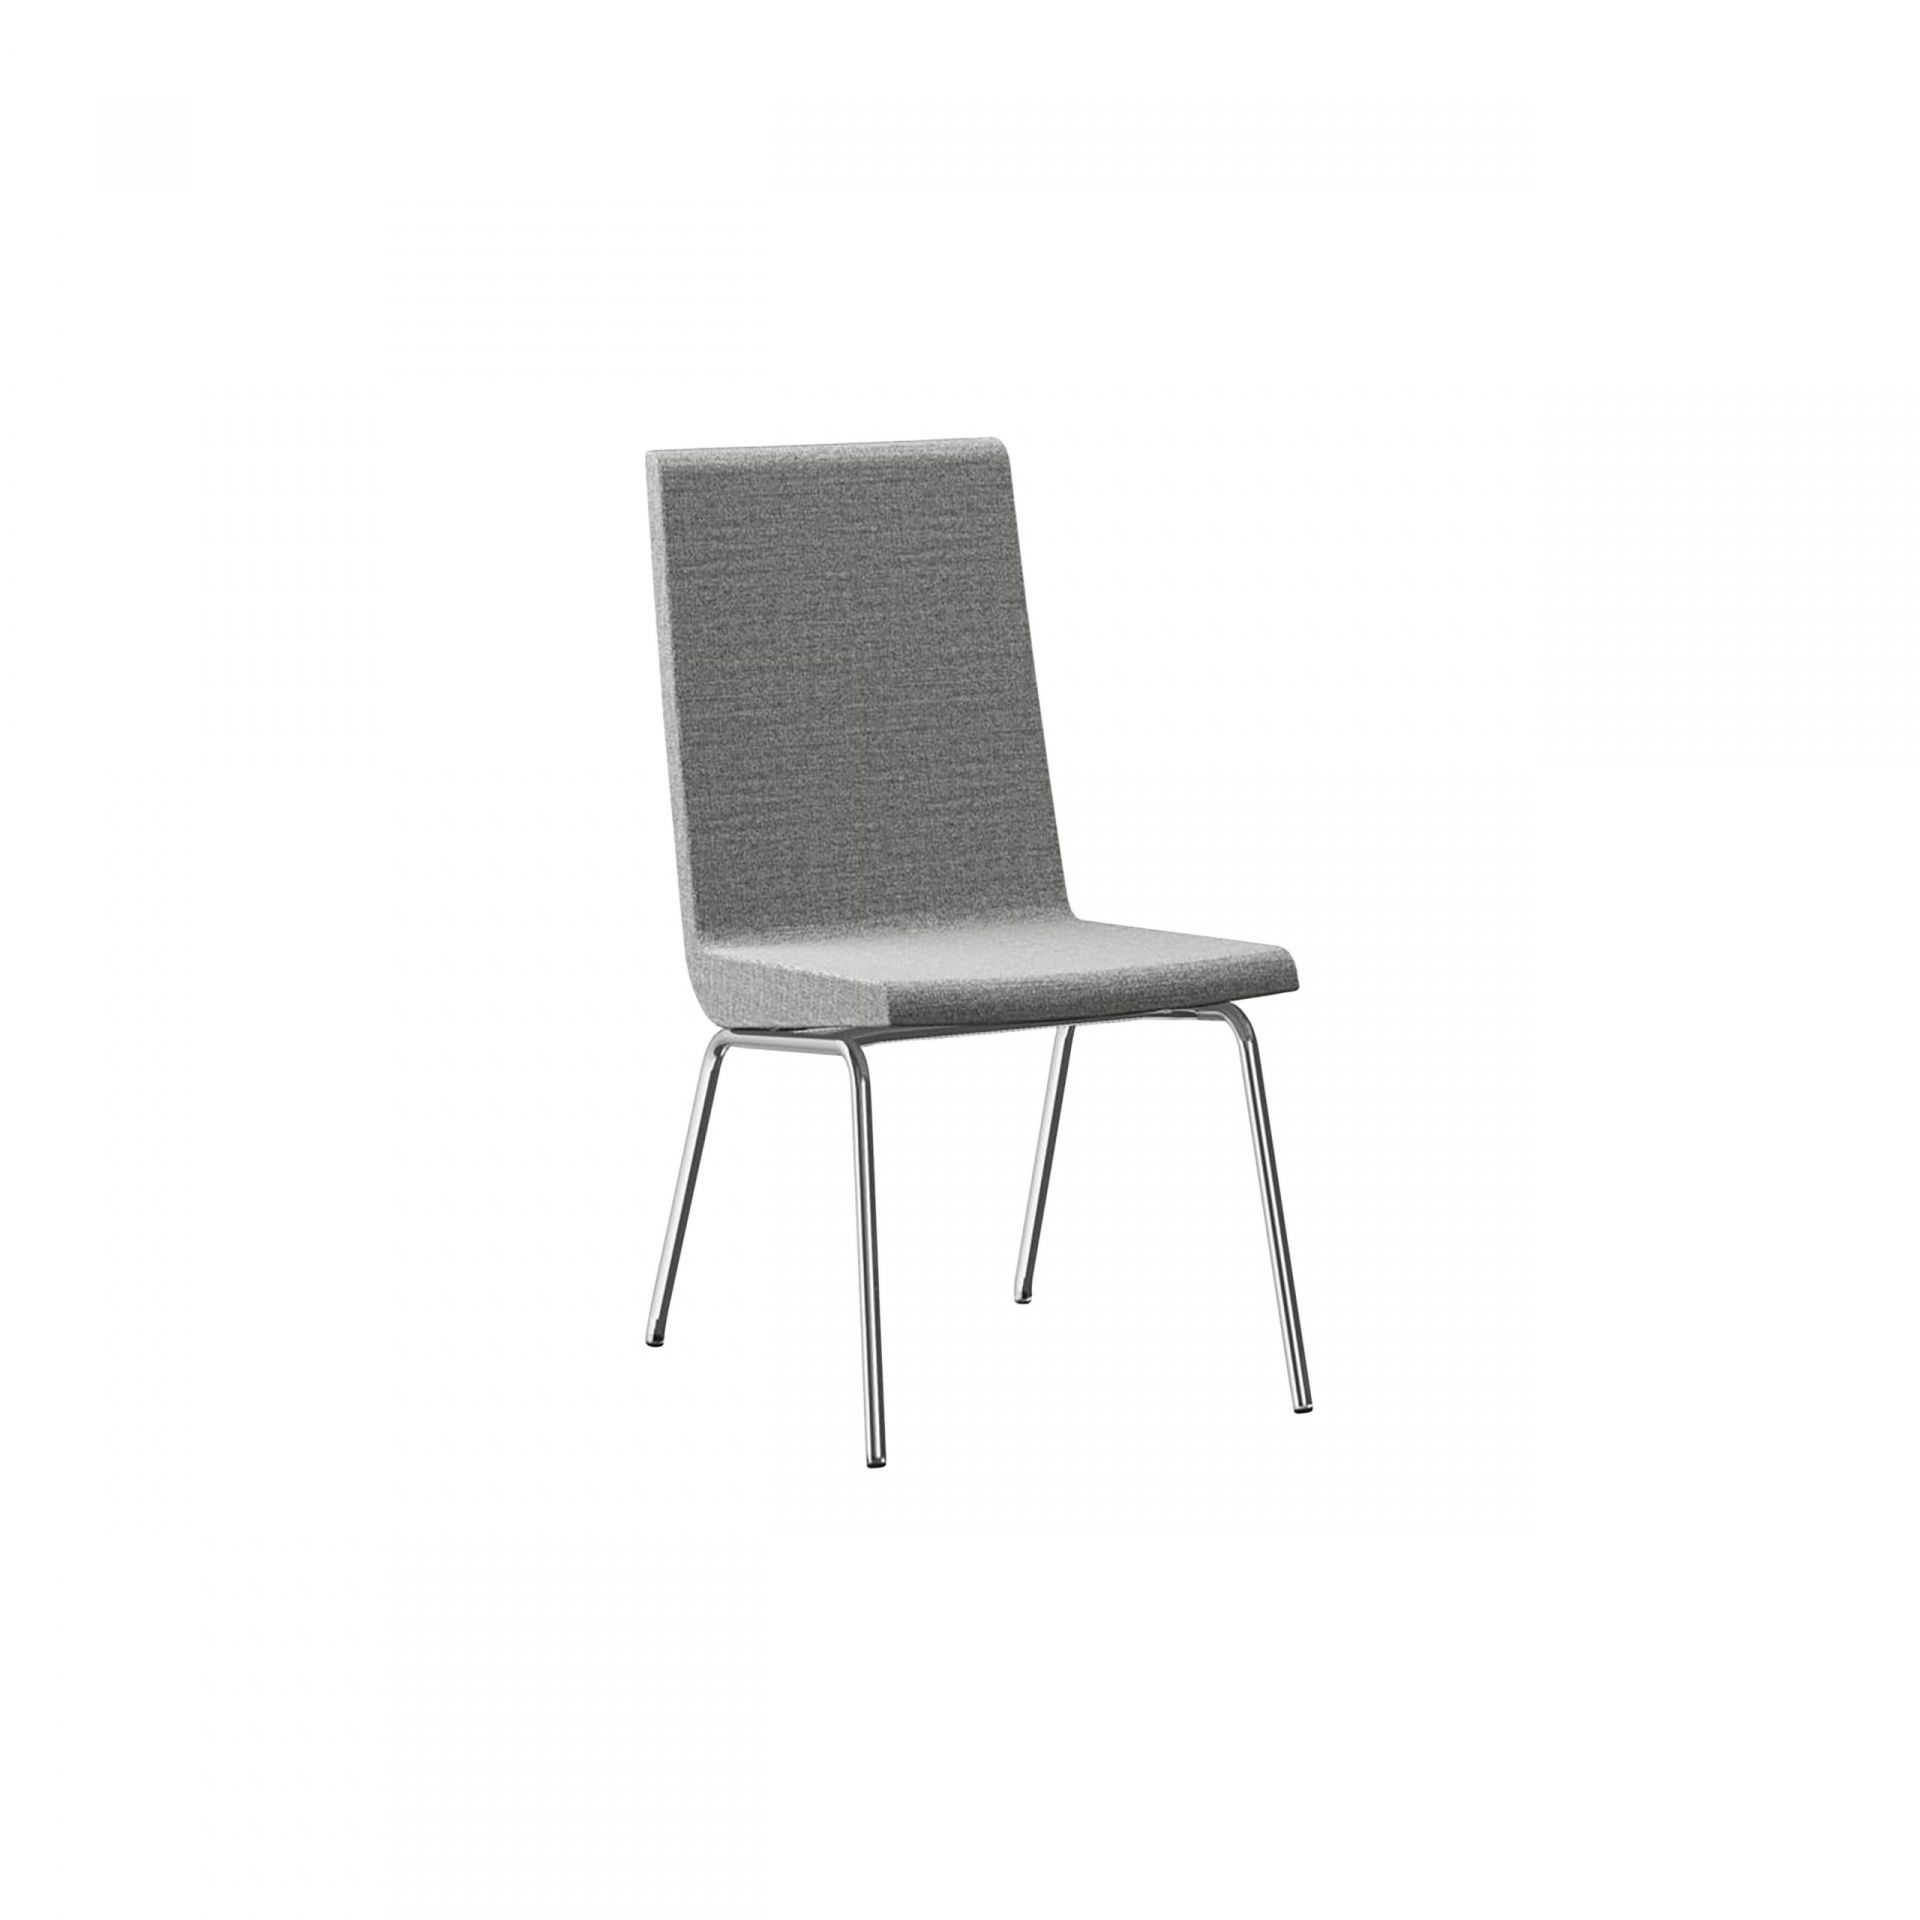 Woods Chair with metal legs product image 3